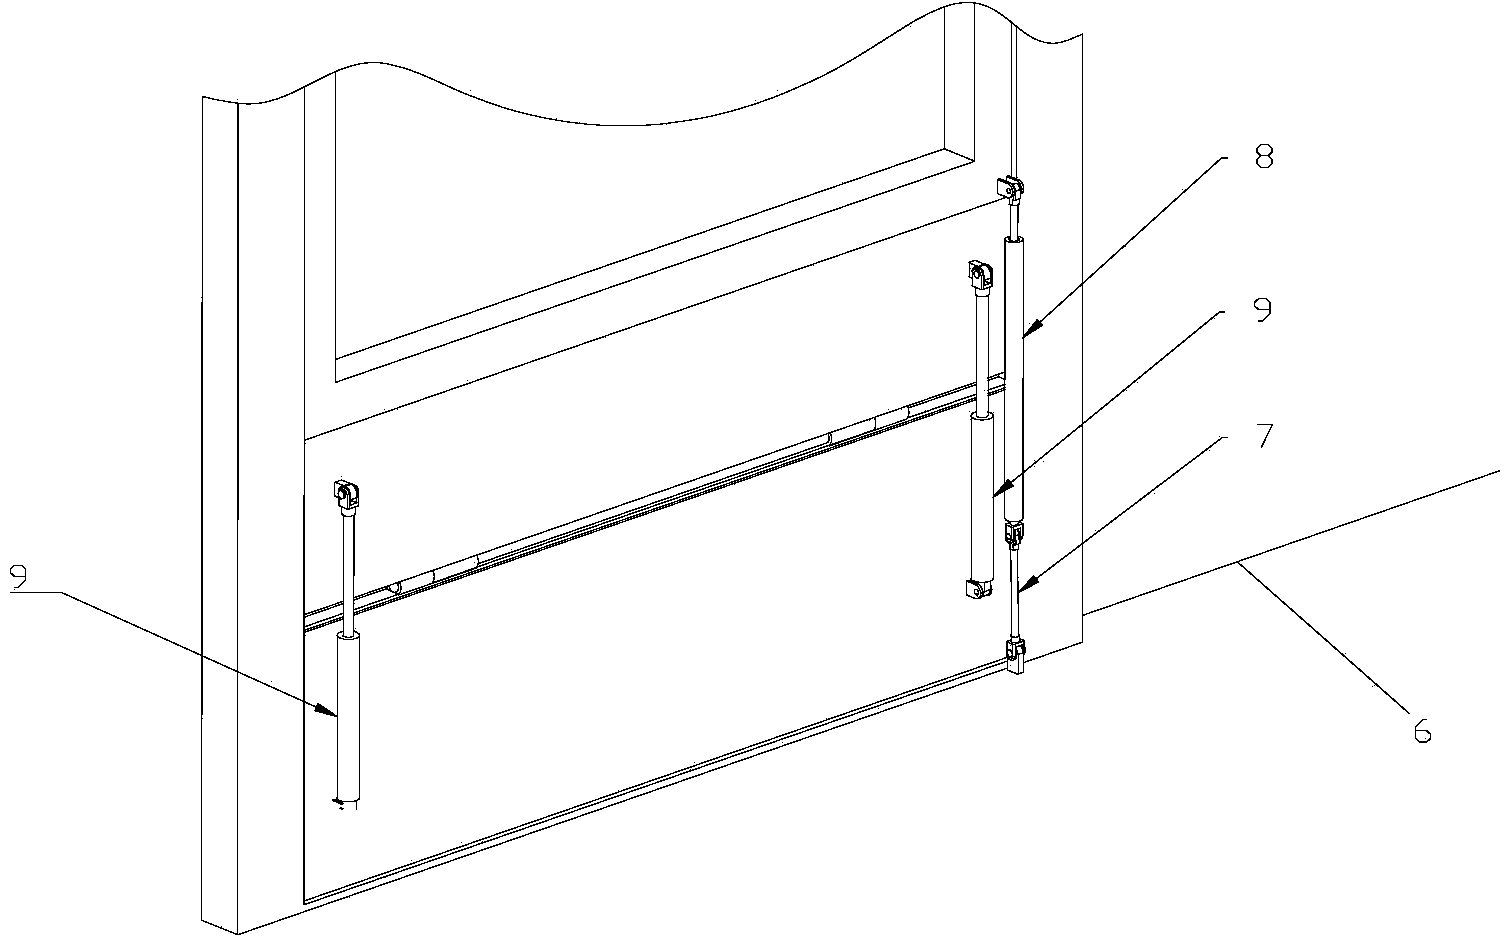 Downward-turnover type foldable escape window for vehicle